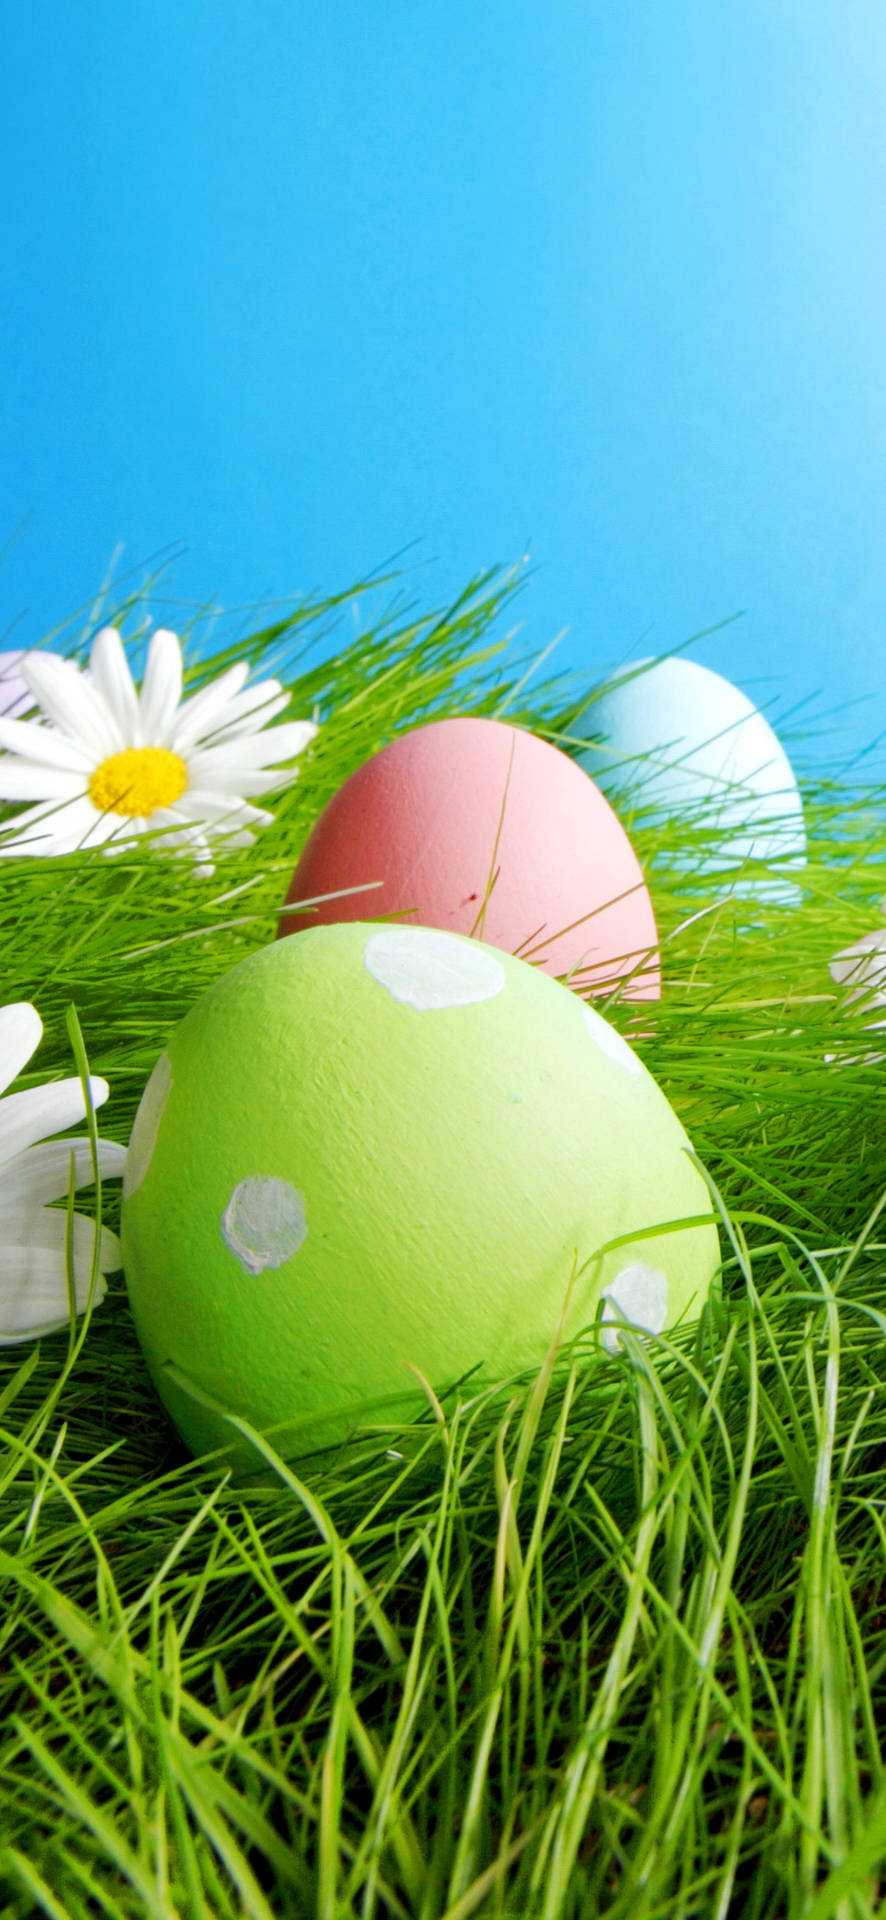 25 Cute Easter Wallpaper Backgrounds For Iphone  Easter wallpaper Happy easter  wallpaper Spring wallpaper